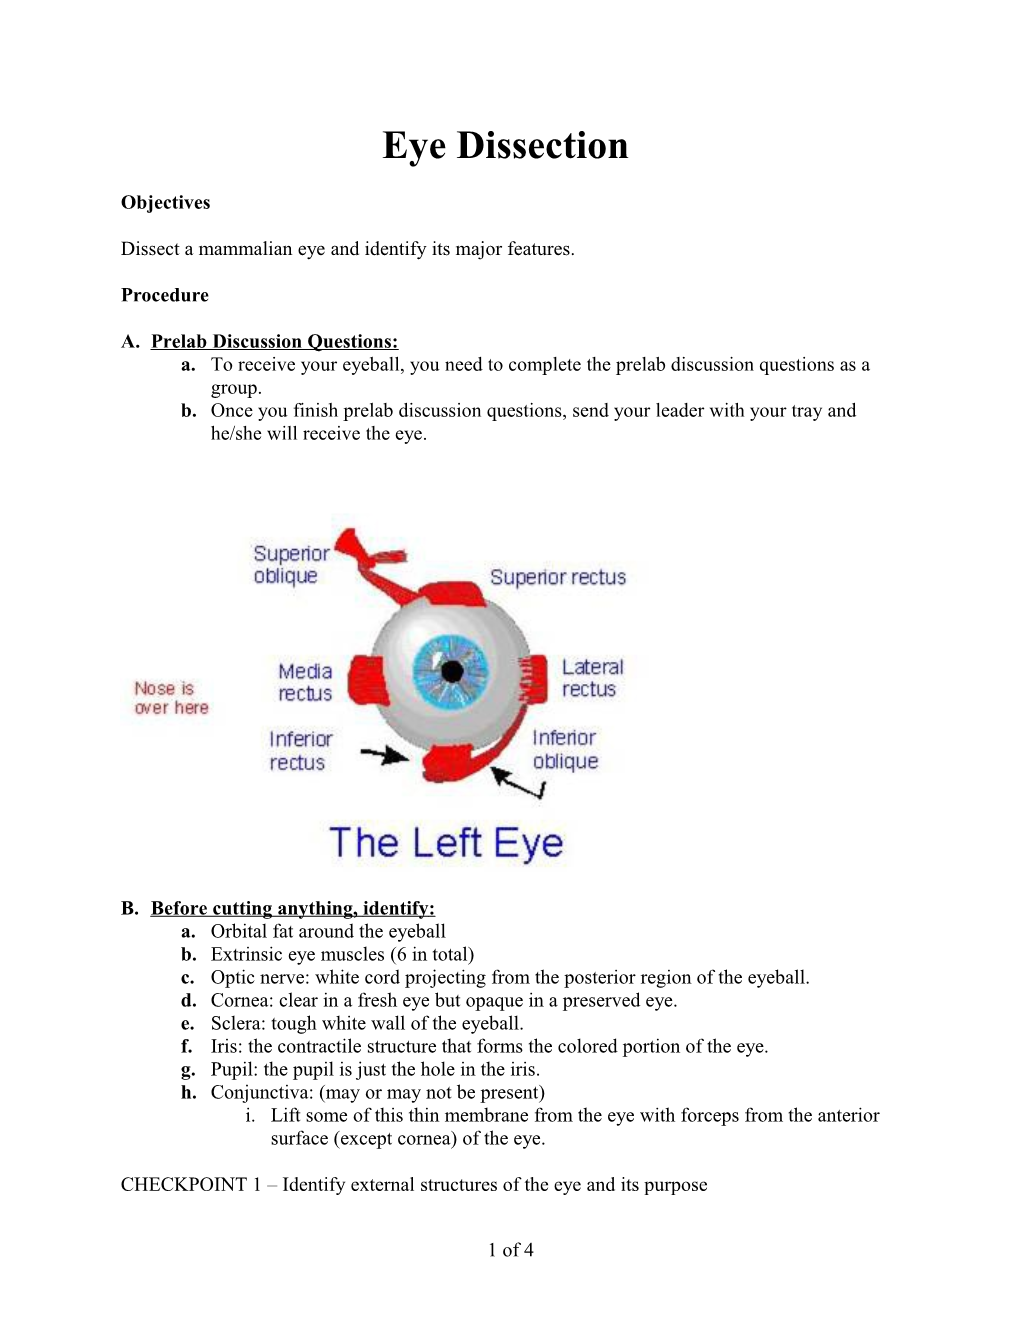 Dissect a Mammalian Eye and Identify Its Major Features